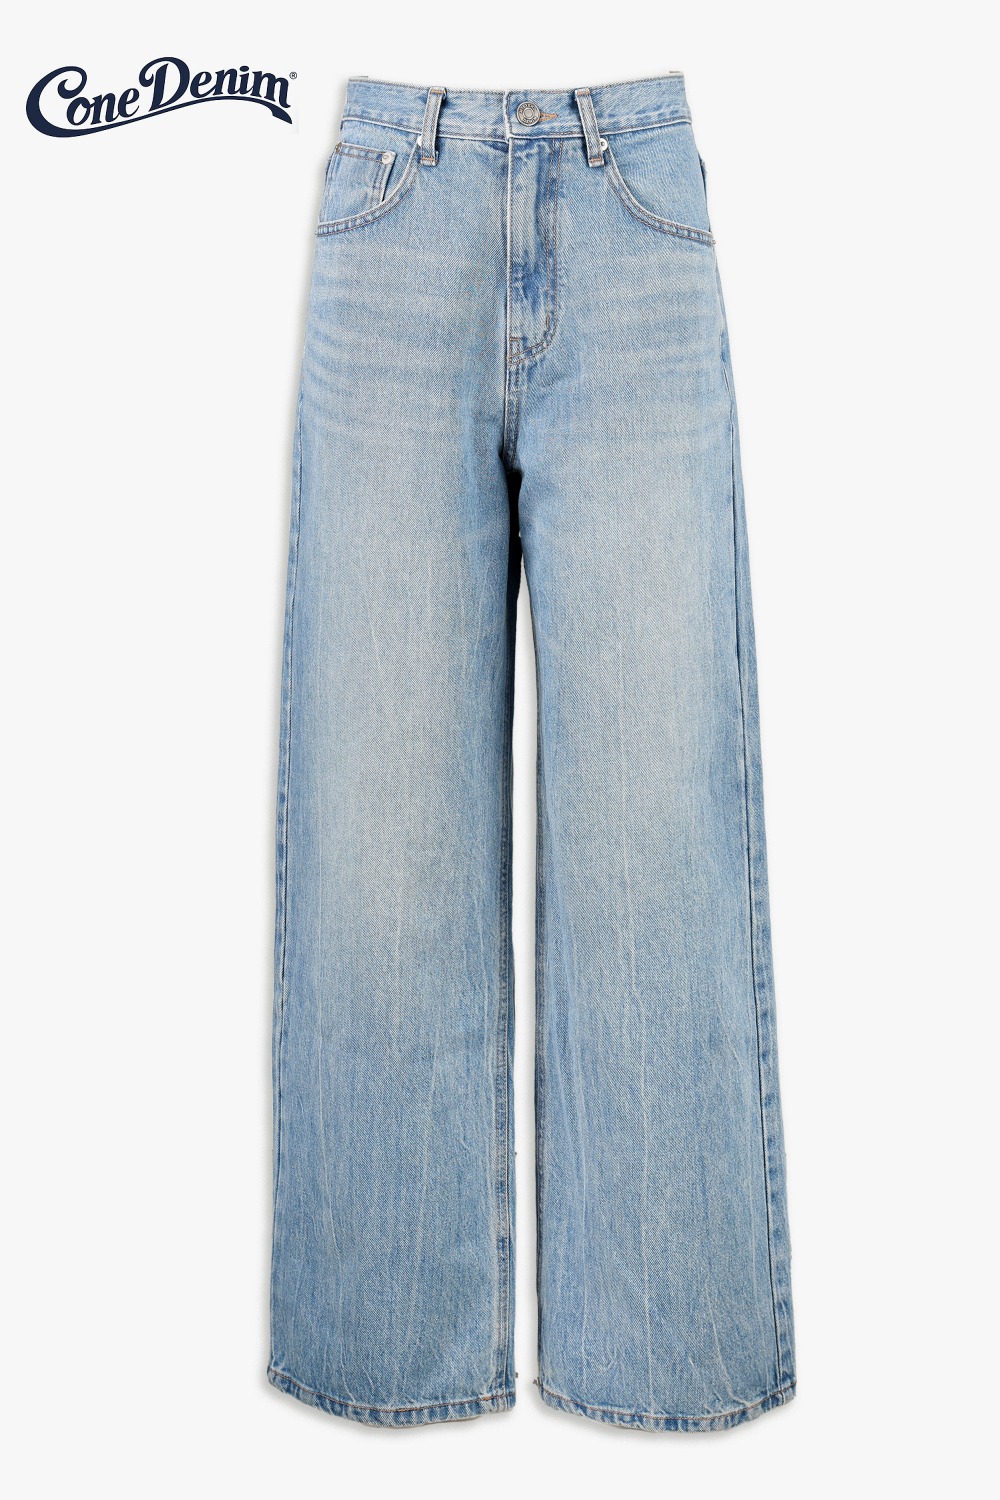 2ND / #005 Washed Wide Cone Denim (LIGHT BLUE) From U.S.A